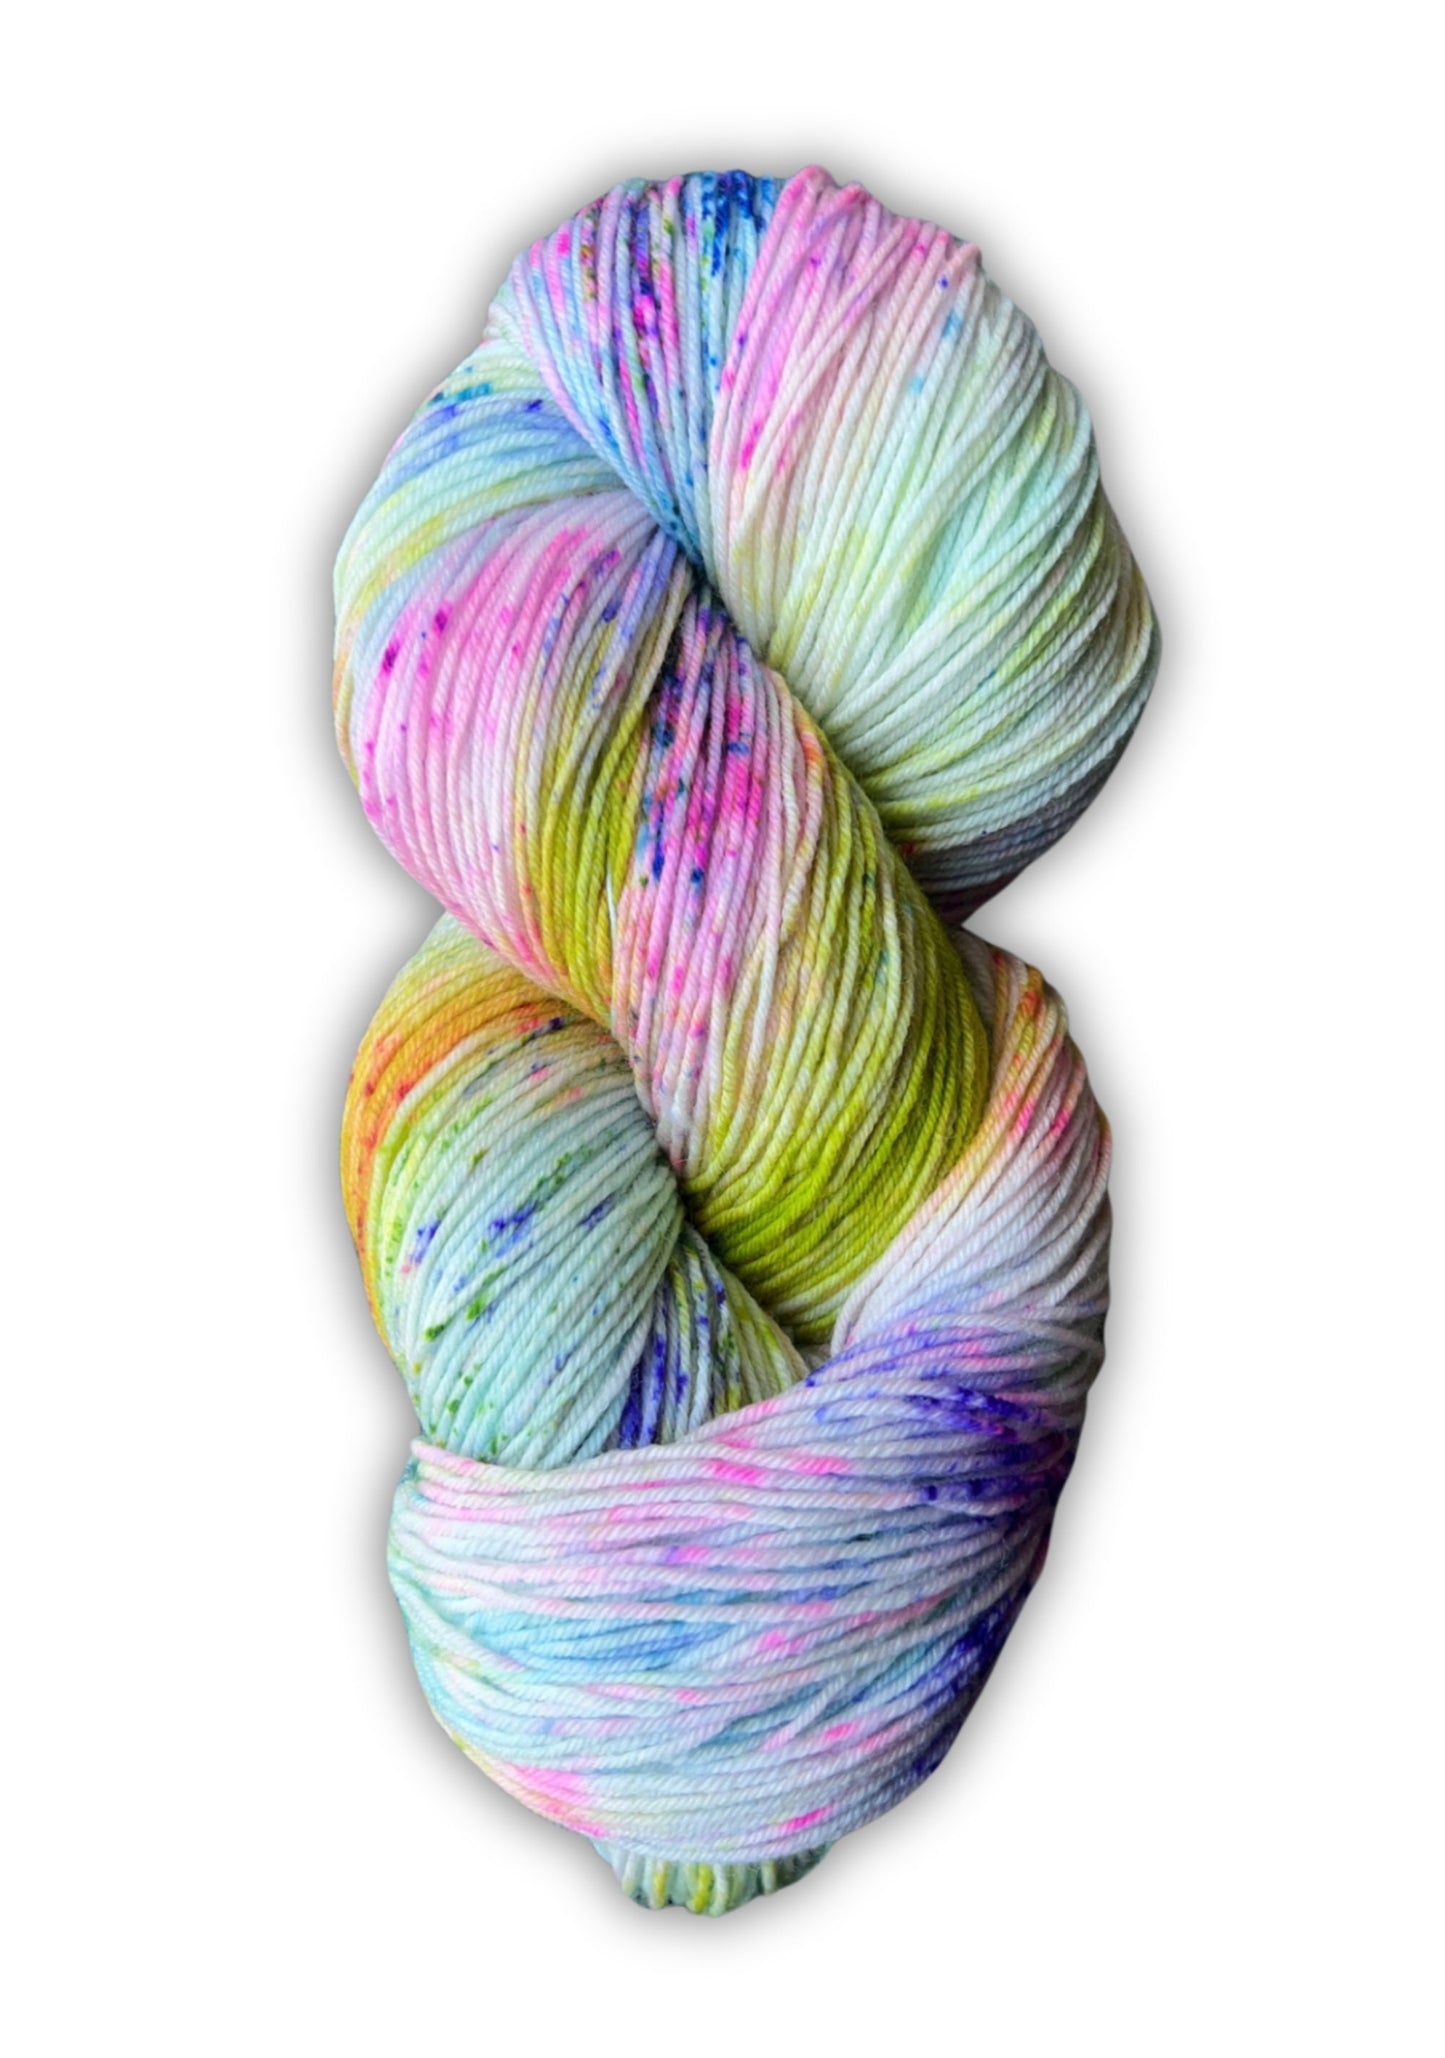 Hand-Dyed Merino Wool Yarn - Soft and Durable Yarn for Knitting and Crocheting | Indie Dyed Merino Wool | Fingering | Virtual Insanity